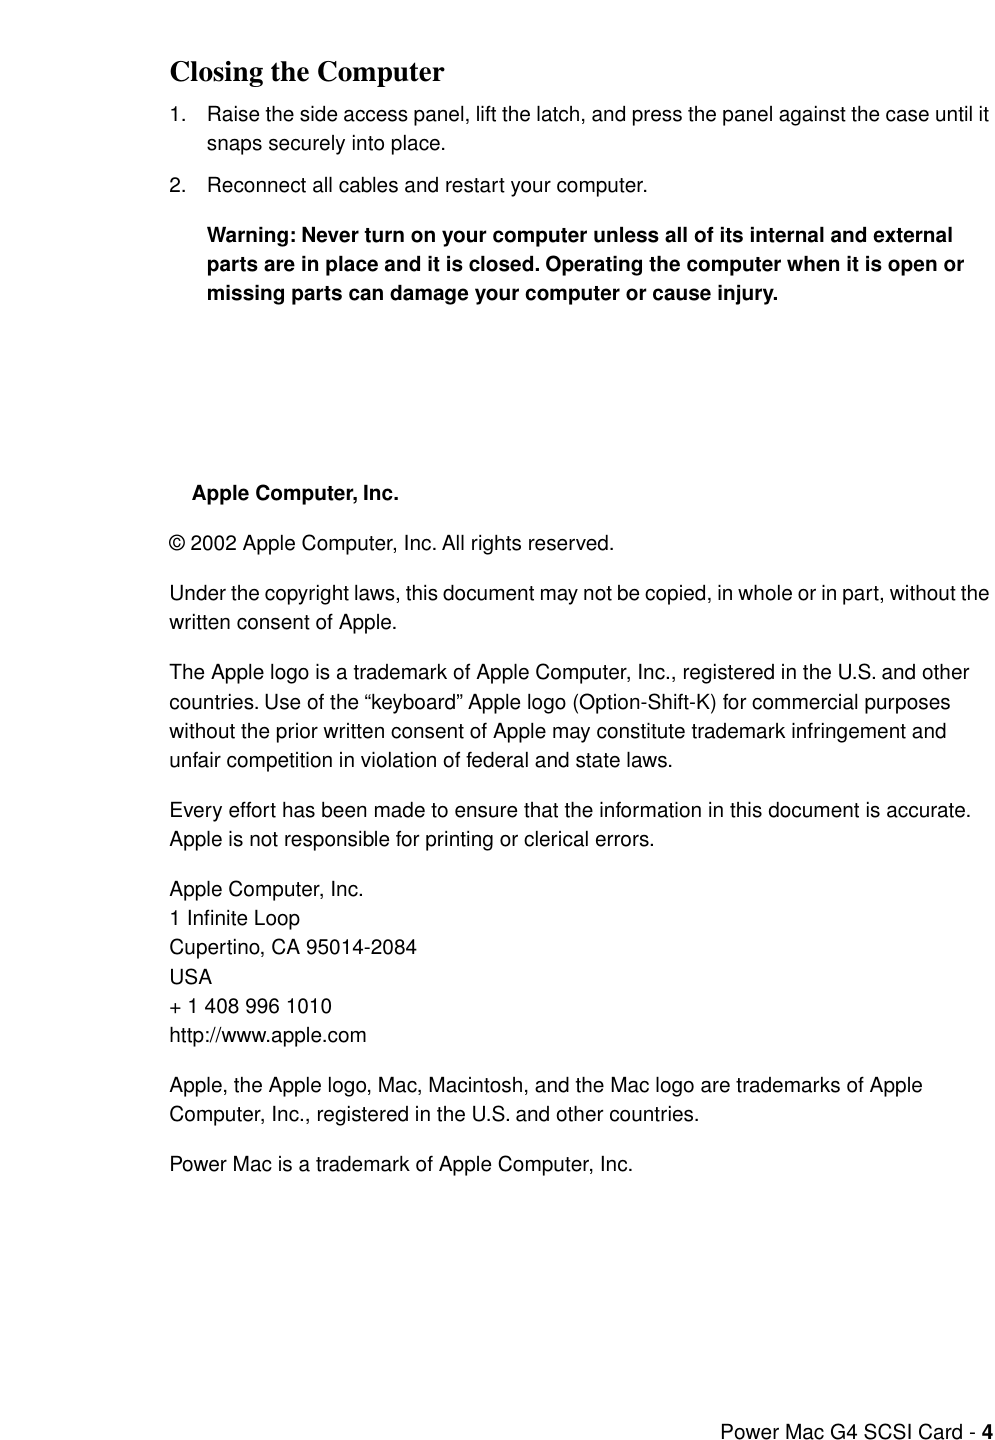 Page 4 of 4 - Apple Power Mac G4 (Digital Audio) User Manual And Macintosh Server - SCSI Card Replacement Instructions G4mdd-scsicard